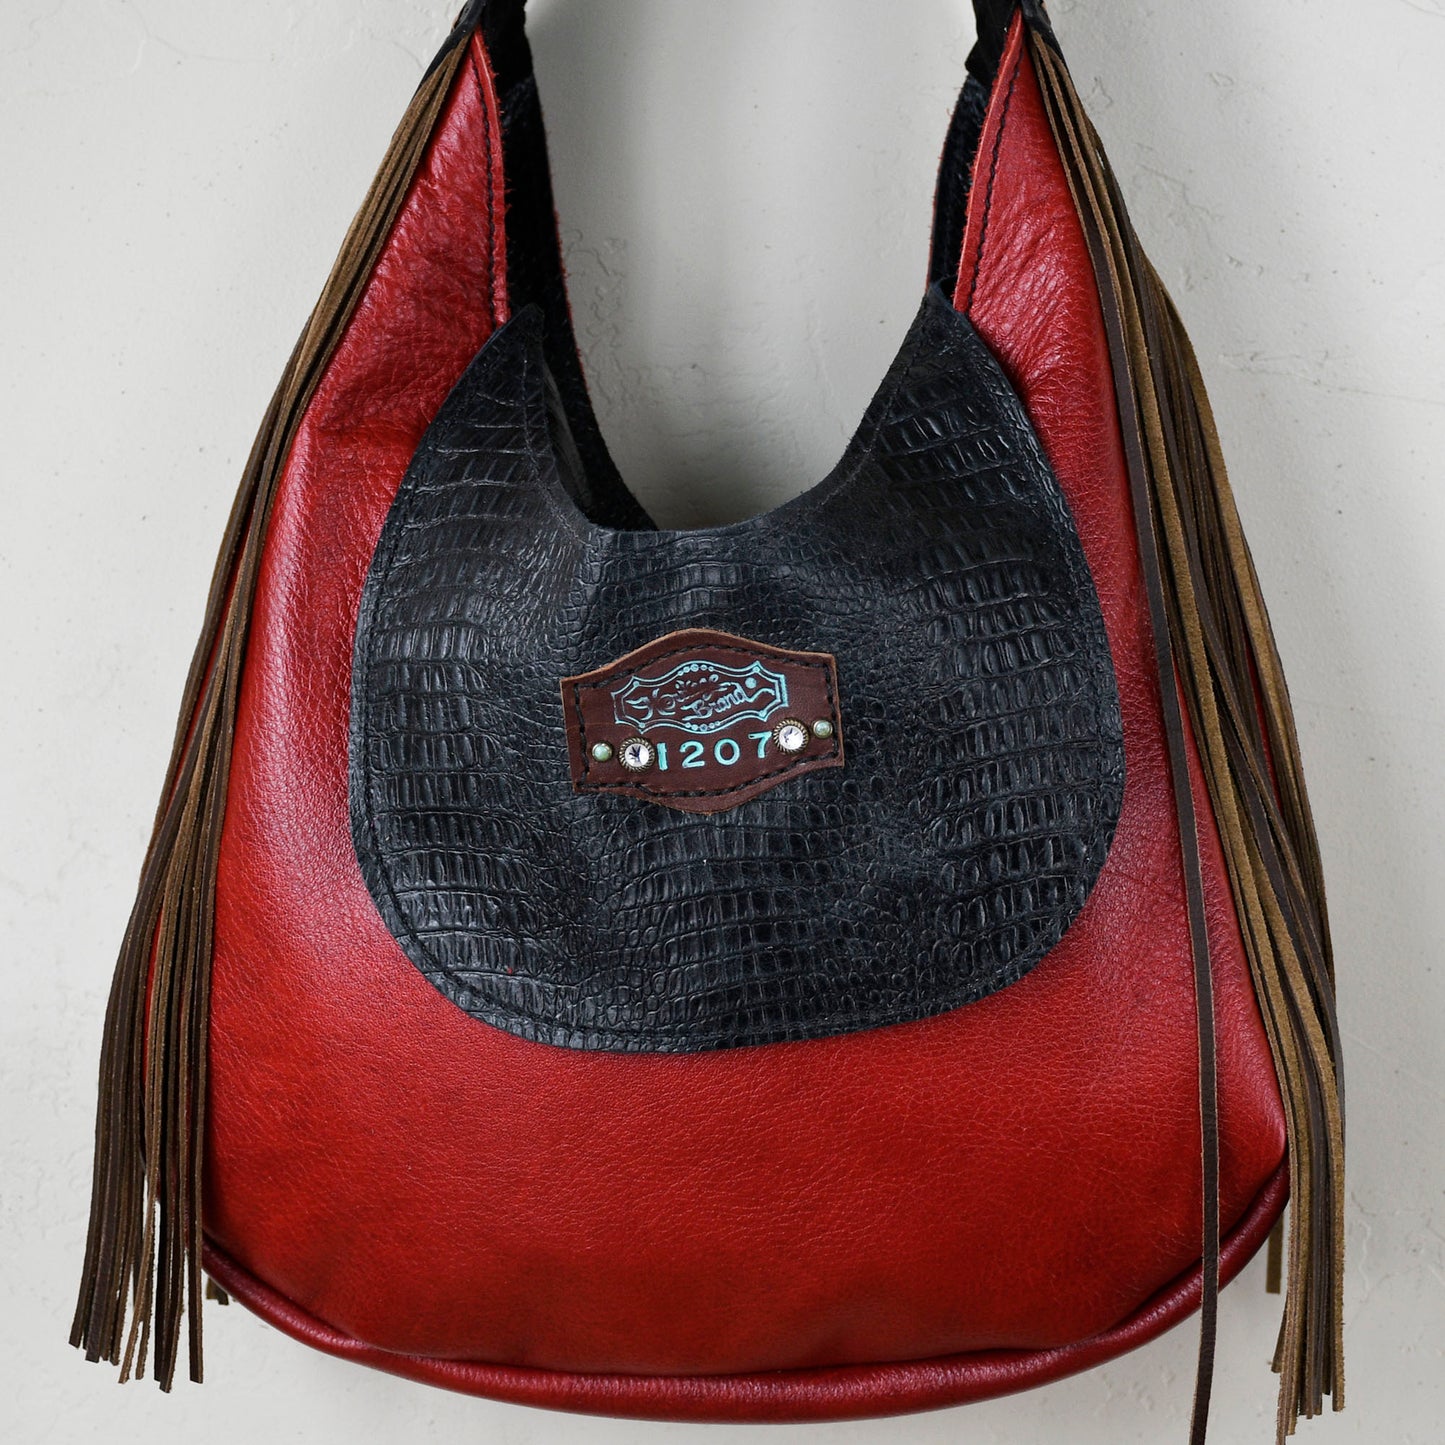 
                  
                    Black and red leather marilyn bag #11 with fringe and a metallic emblem by Heritage Brand.
                  
                